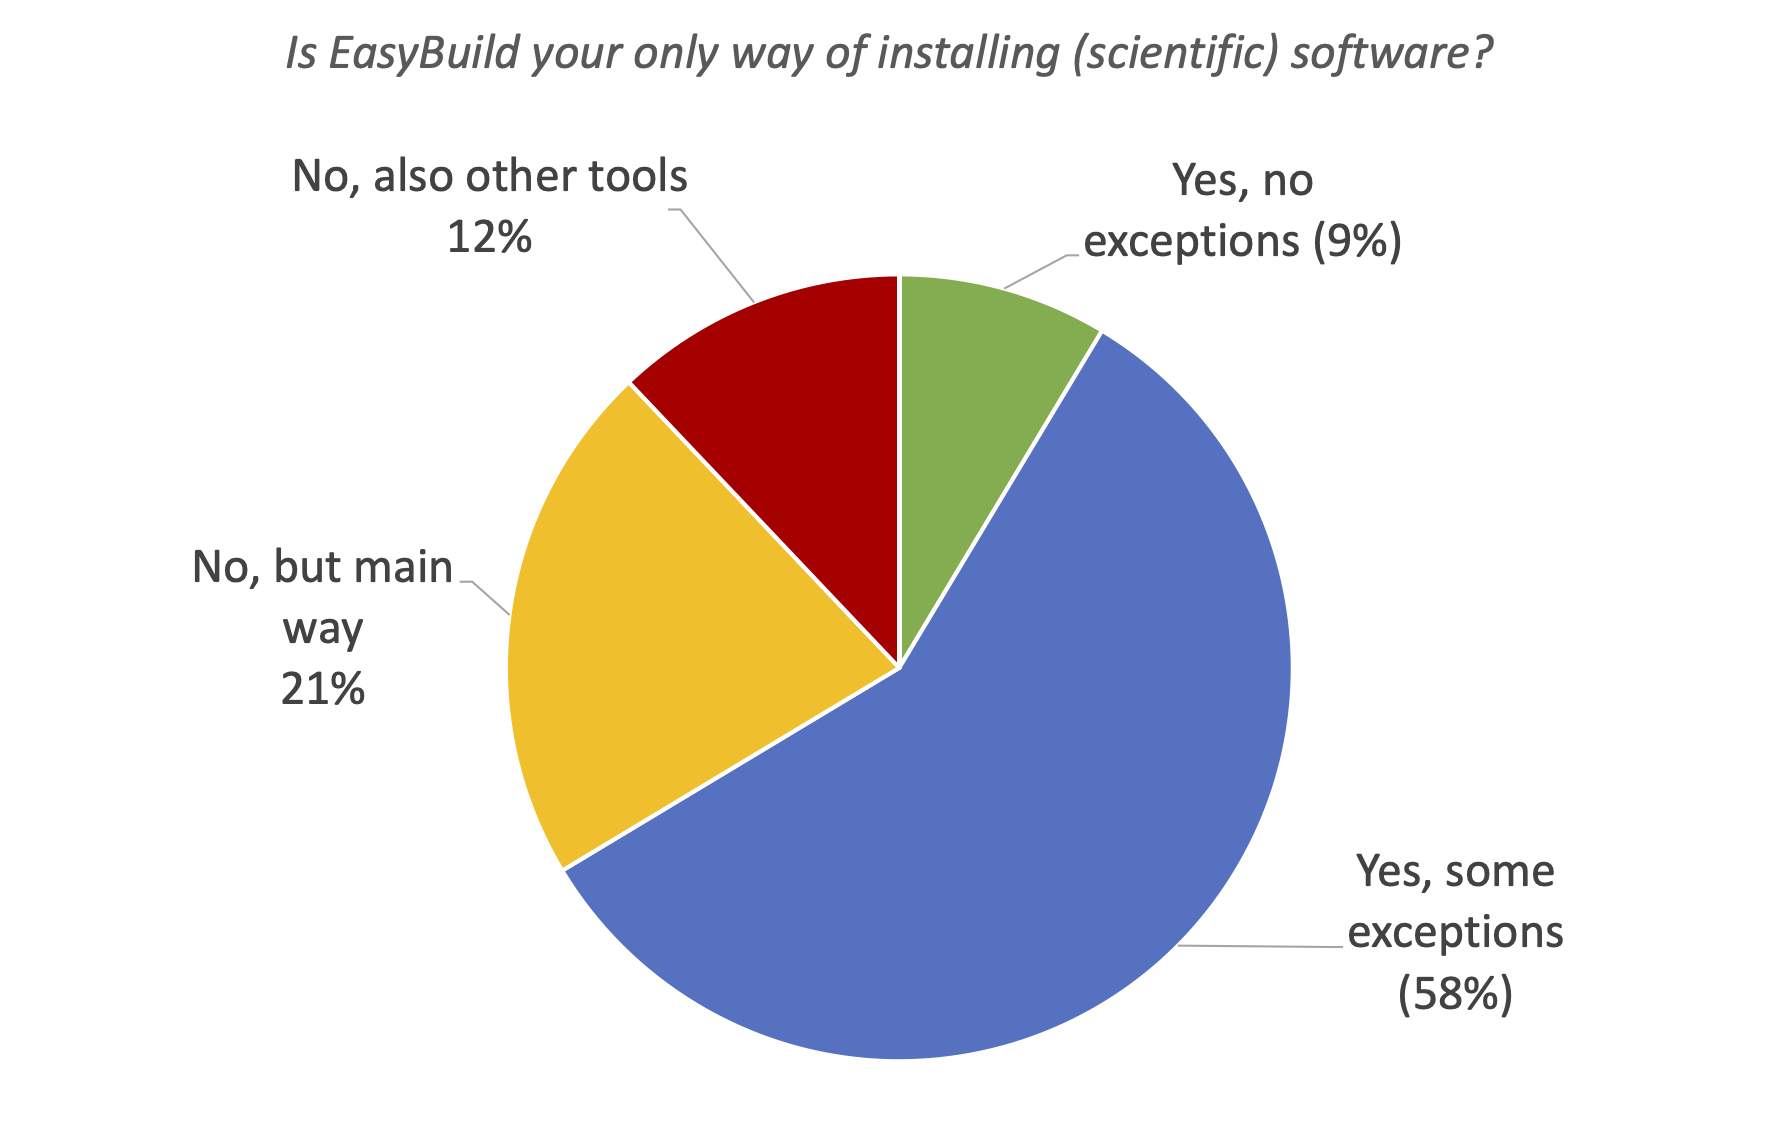 24. Is EasyBuild your only way of installing (scientific) software?